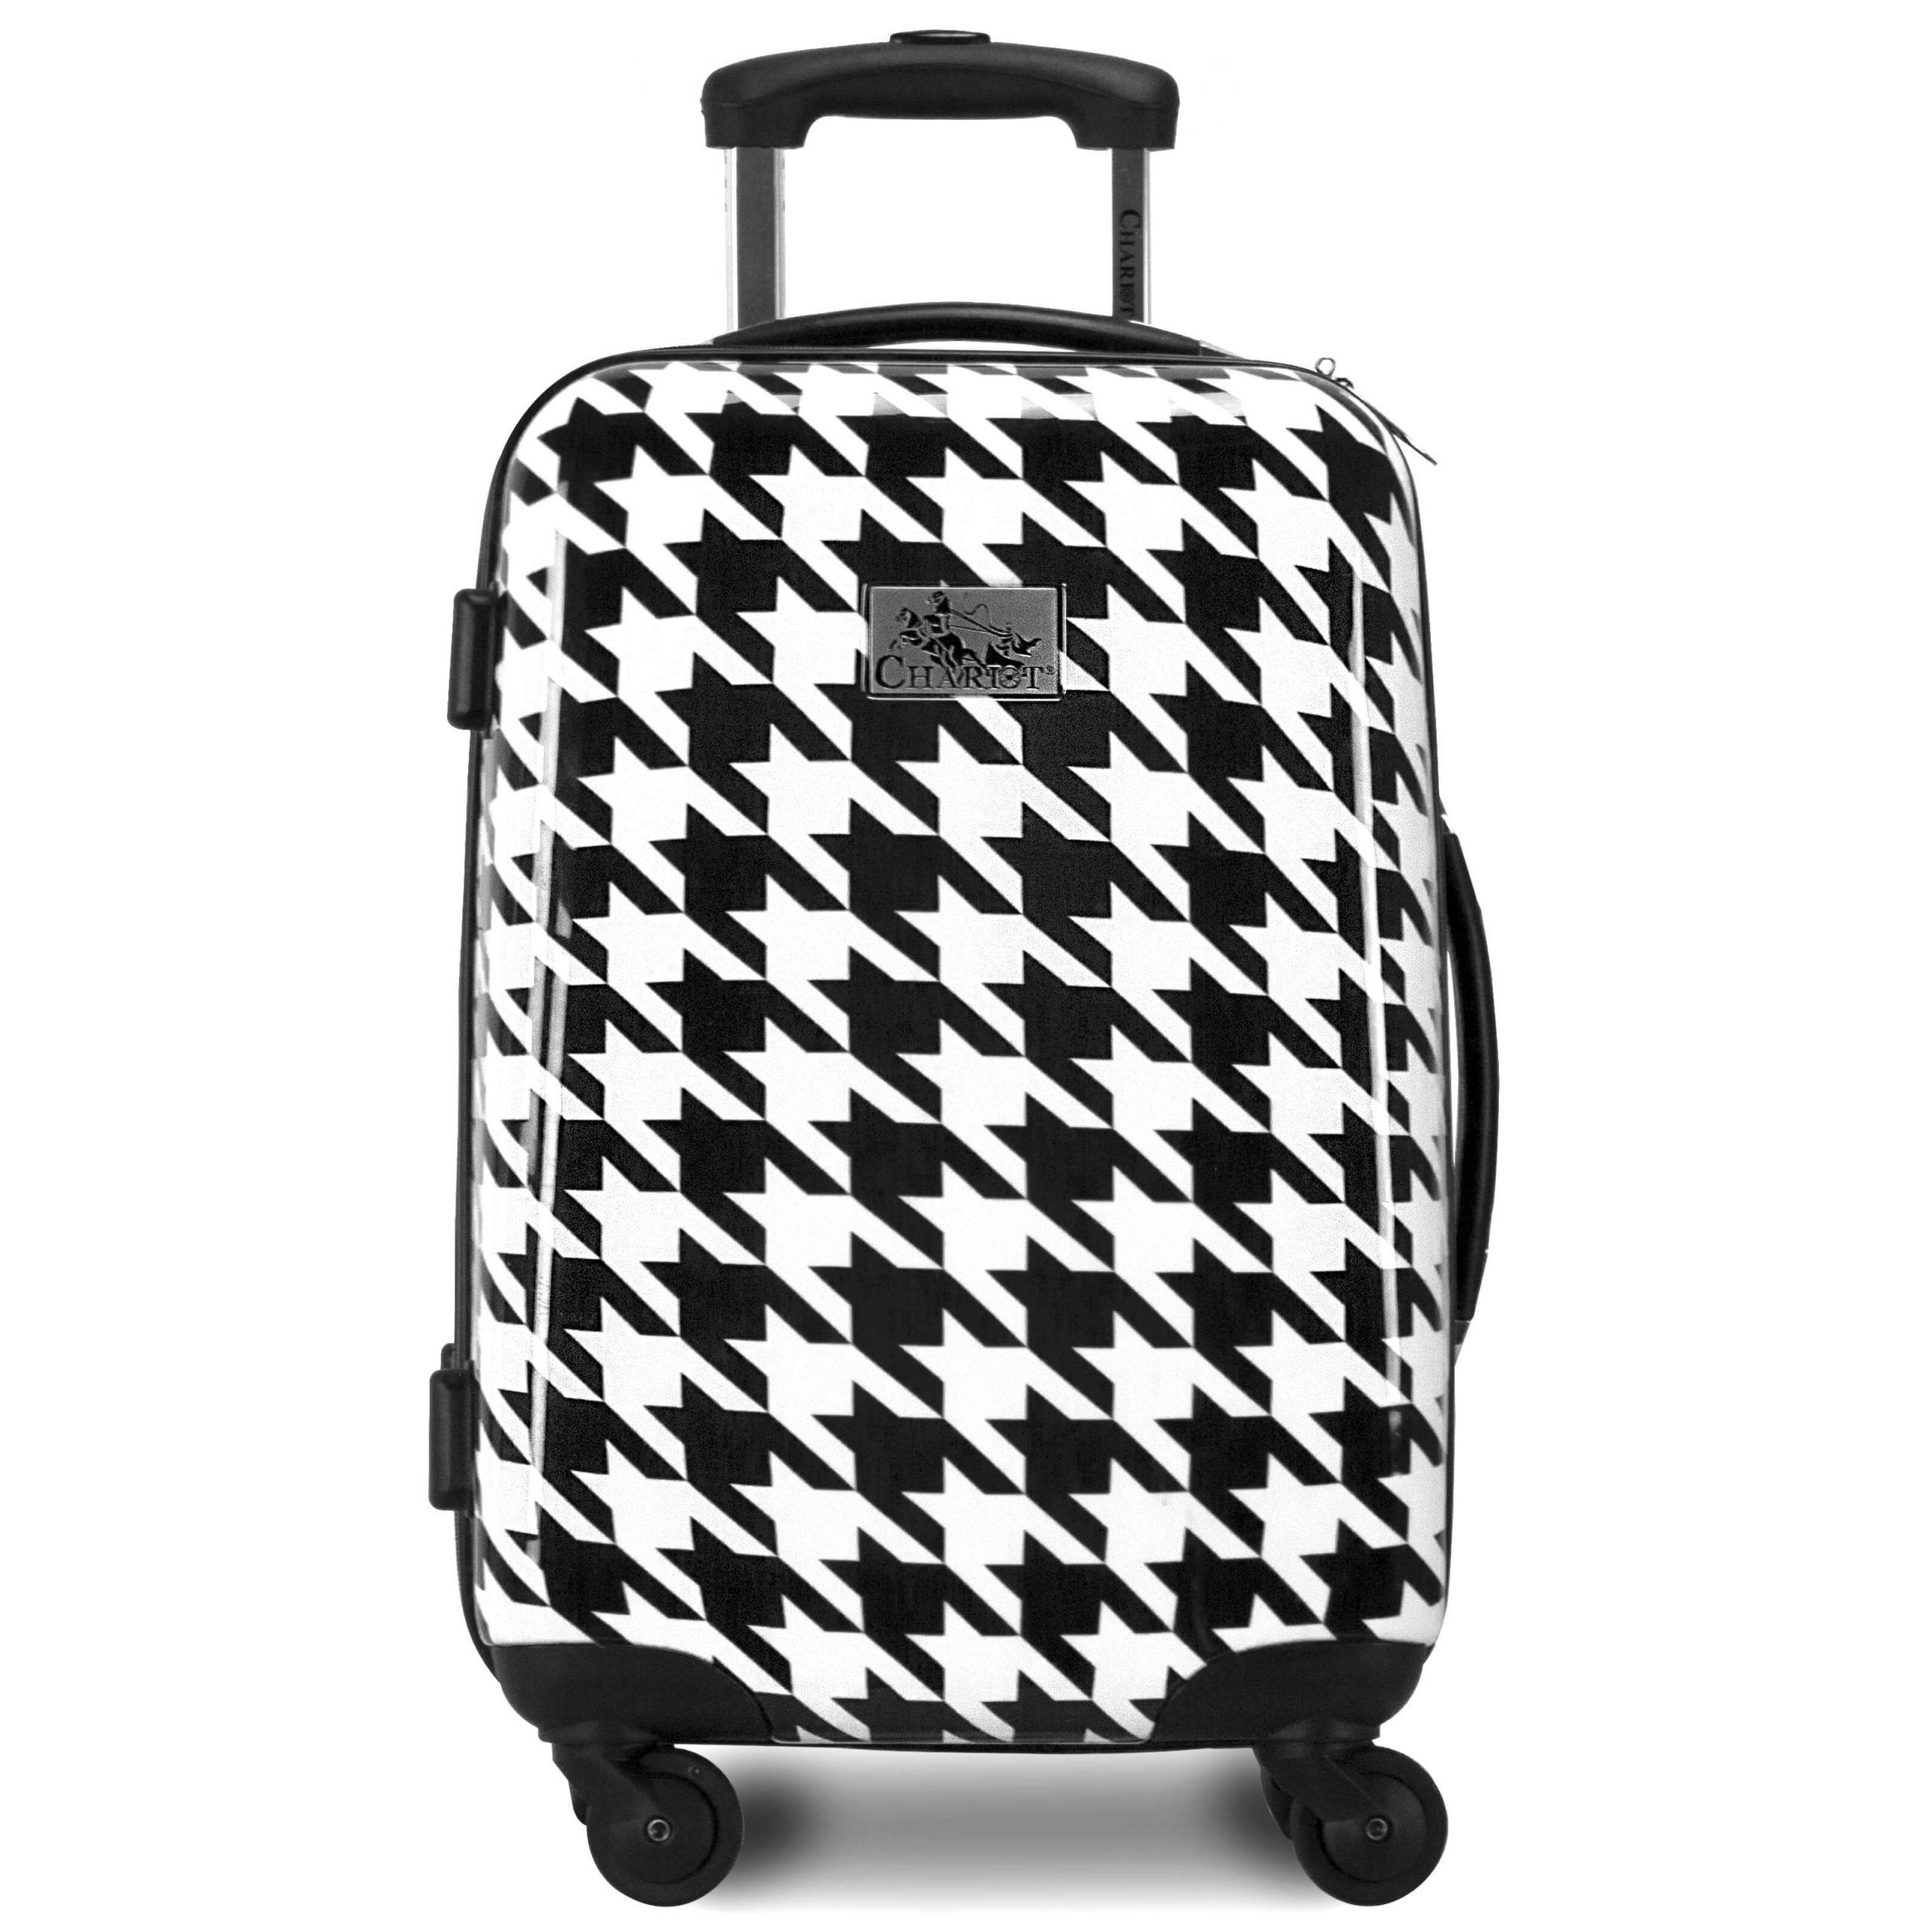 White Chariot Regal Two-Piece Carry-On Luggage Set, Best Price and Reviews